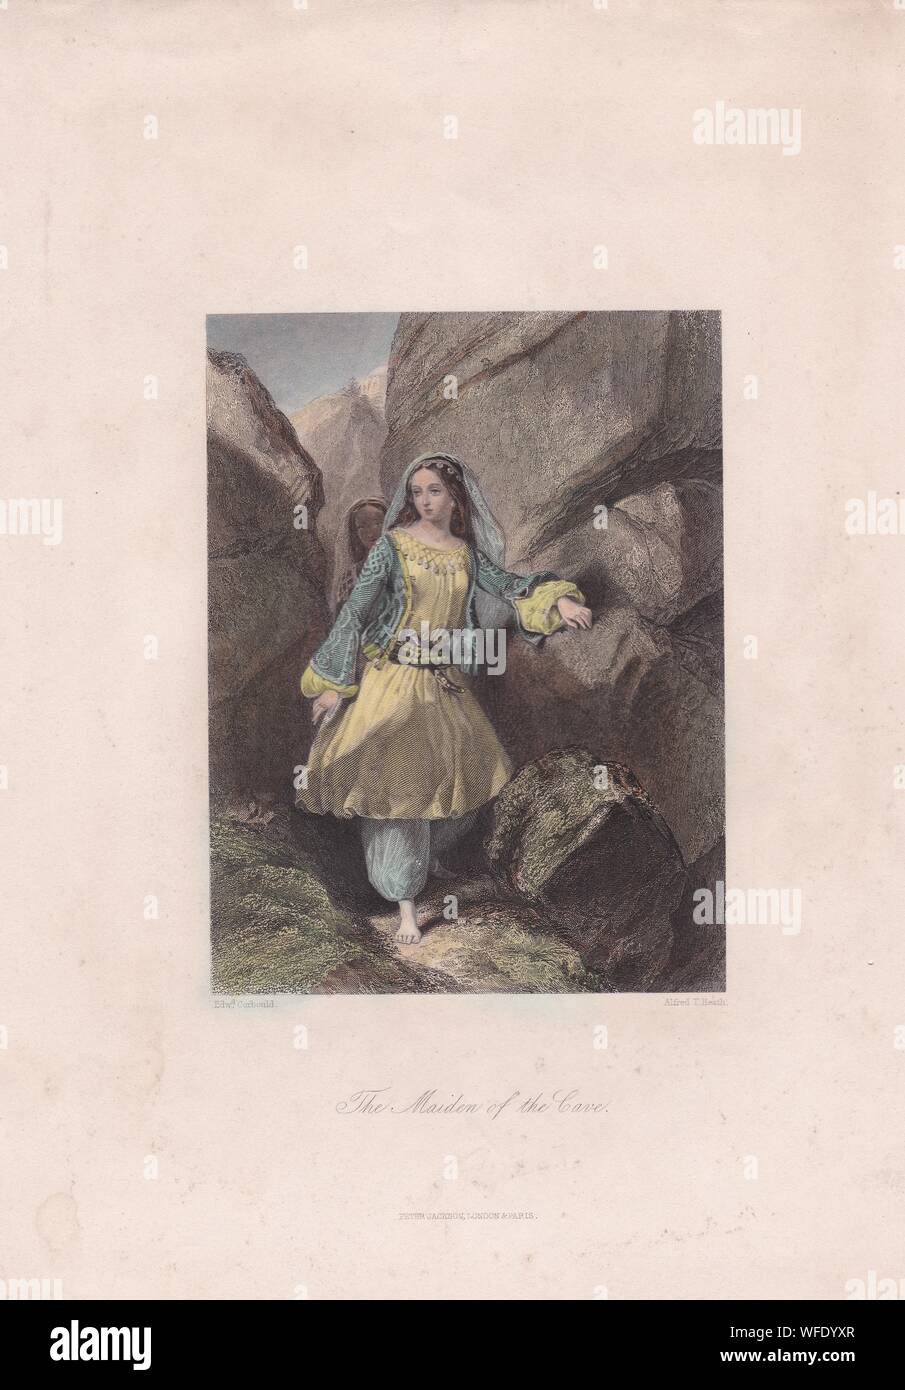 Book plate / print of 'The Maiden of the Cave'.  Painted by Edward Henry Corbould. Stock Photo